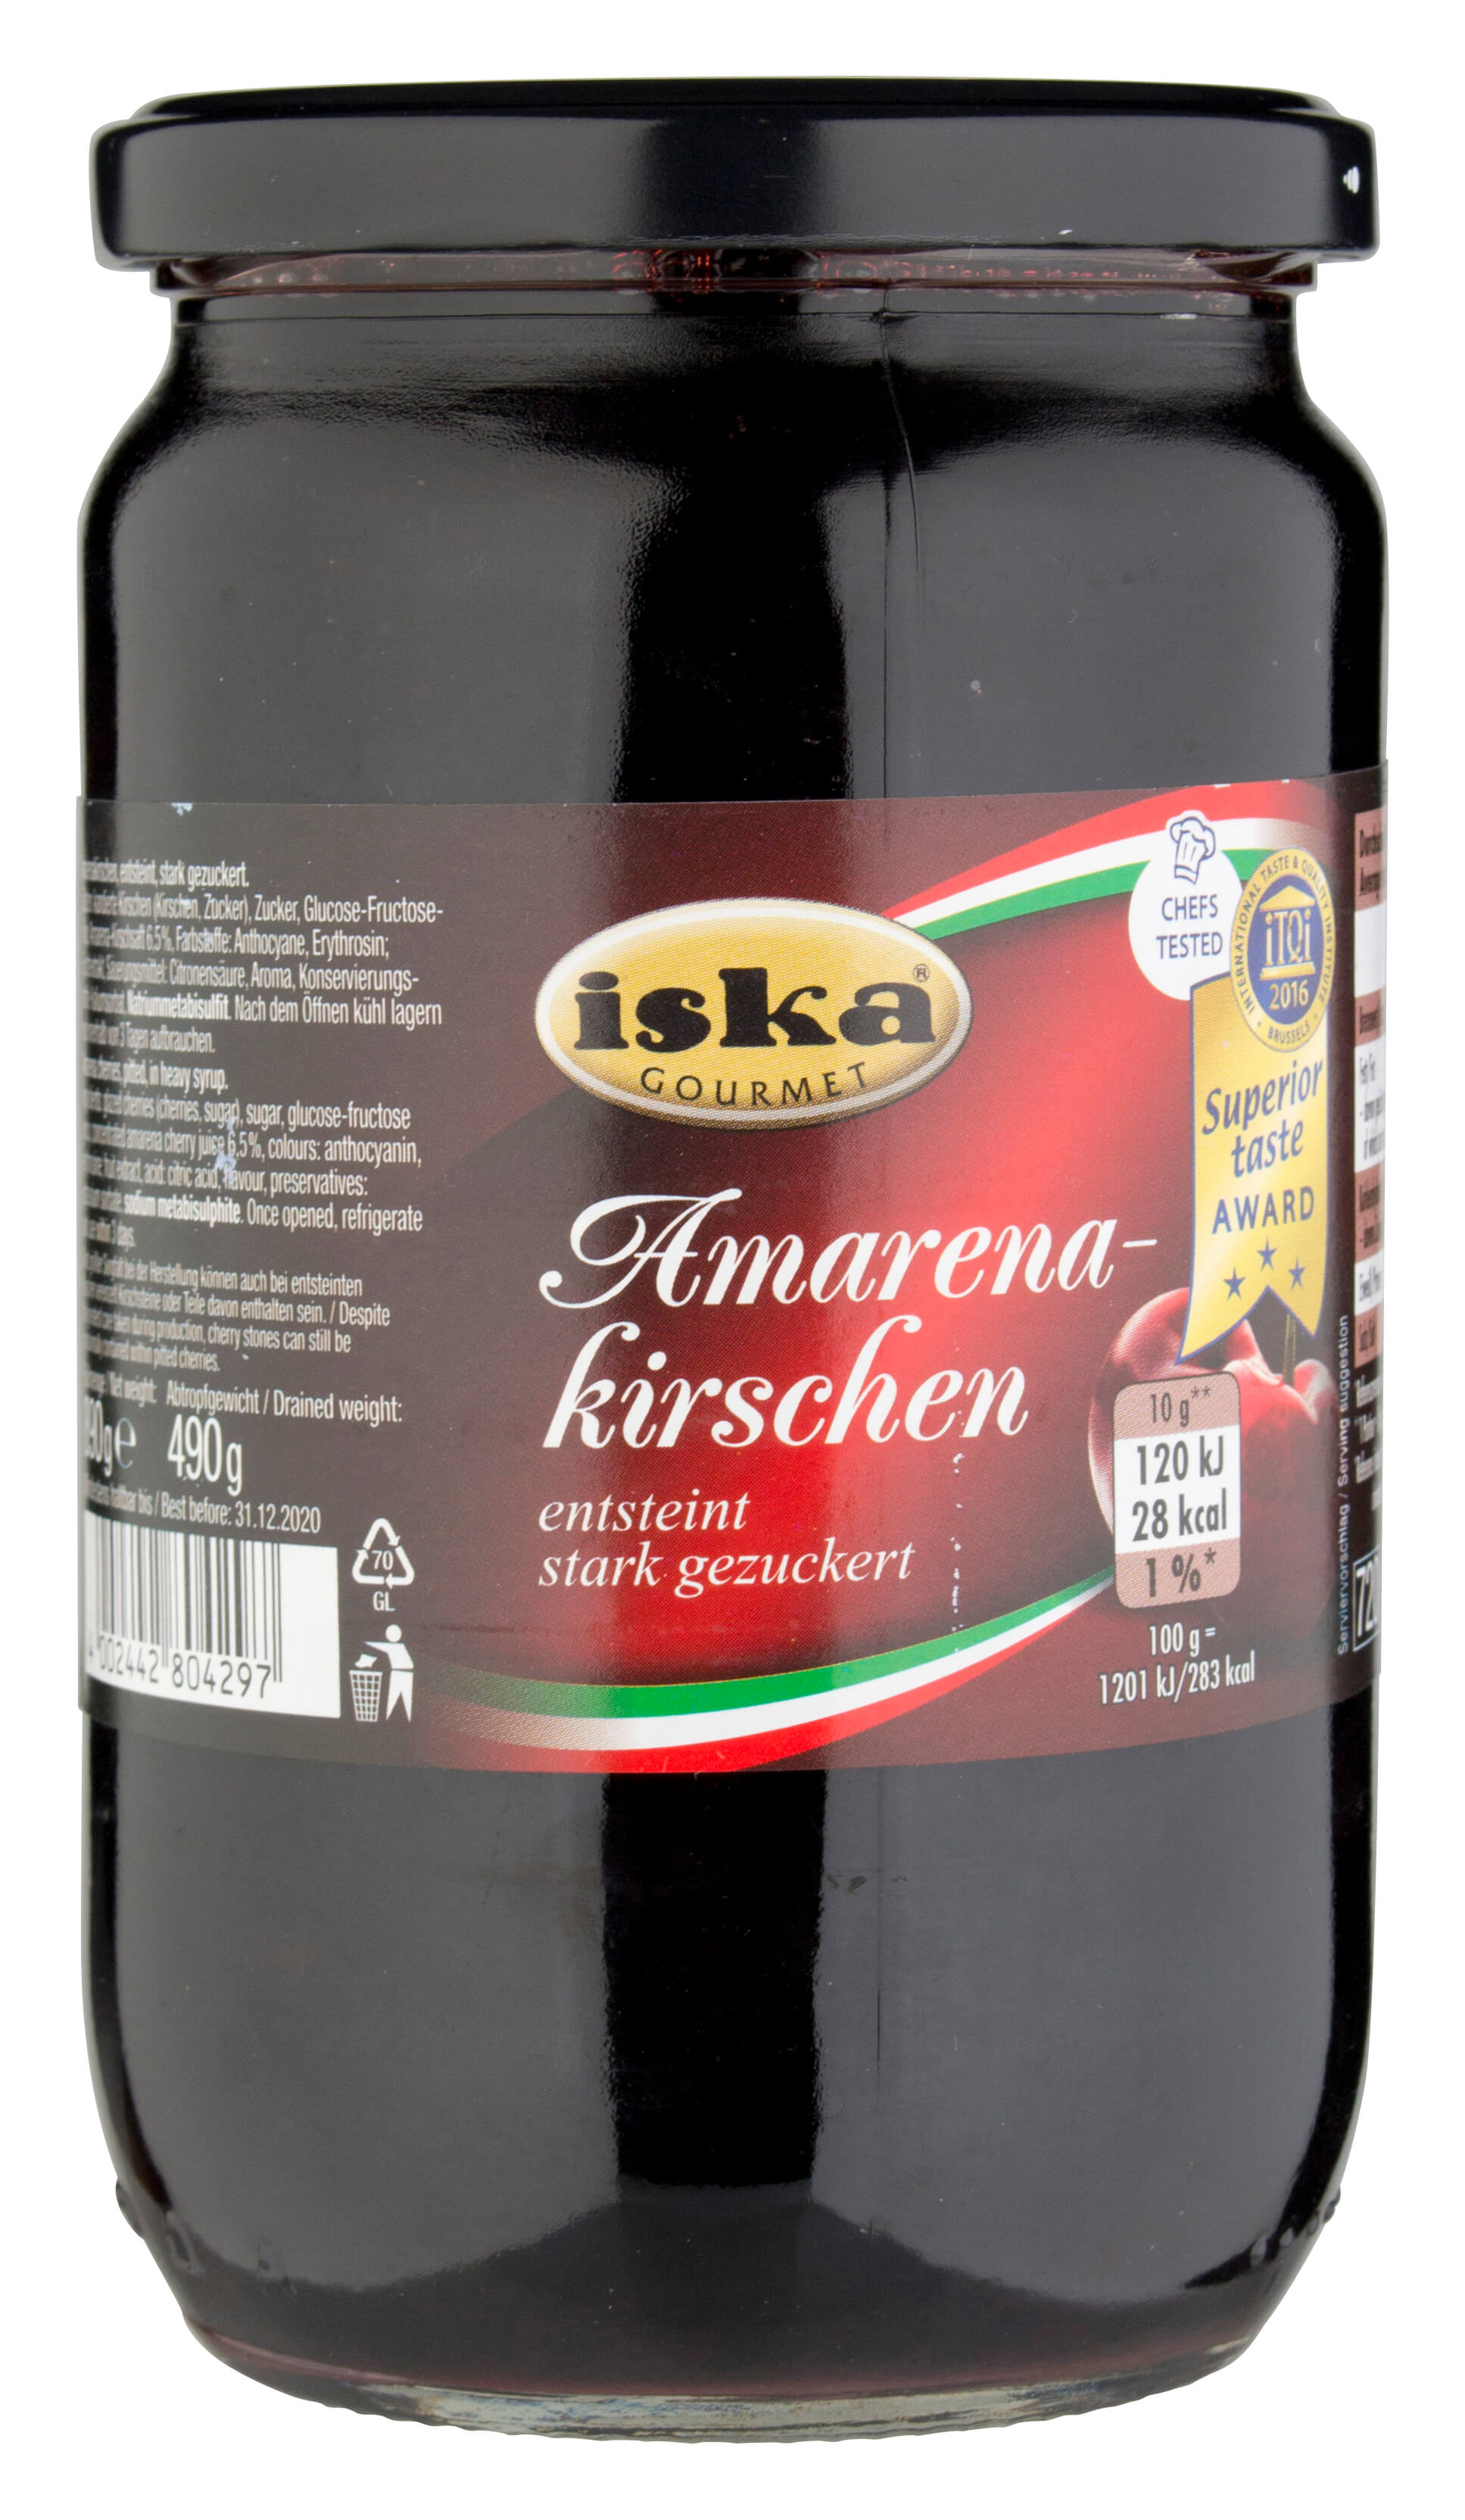 Amarena cherries, pitted, in heavy syrup - 890g